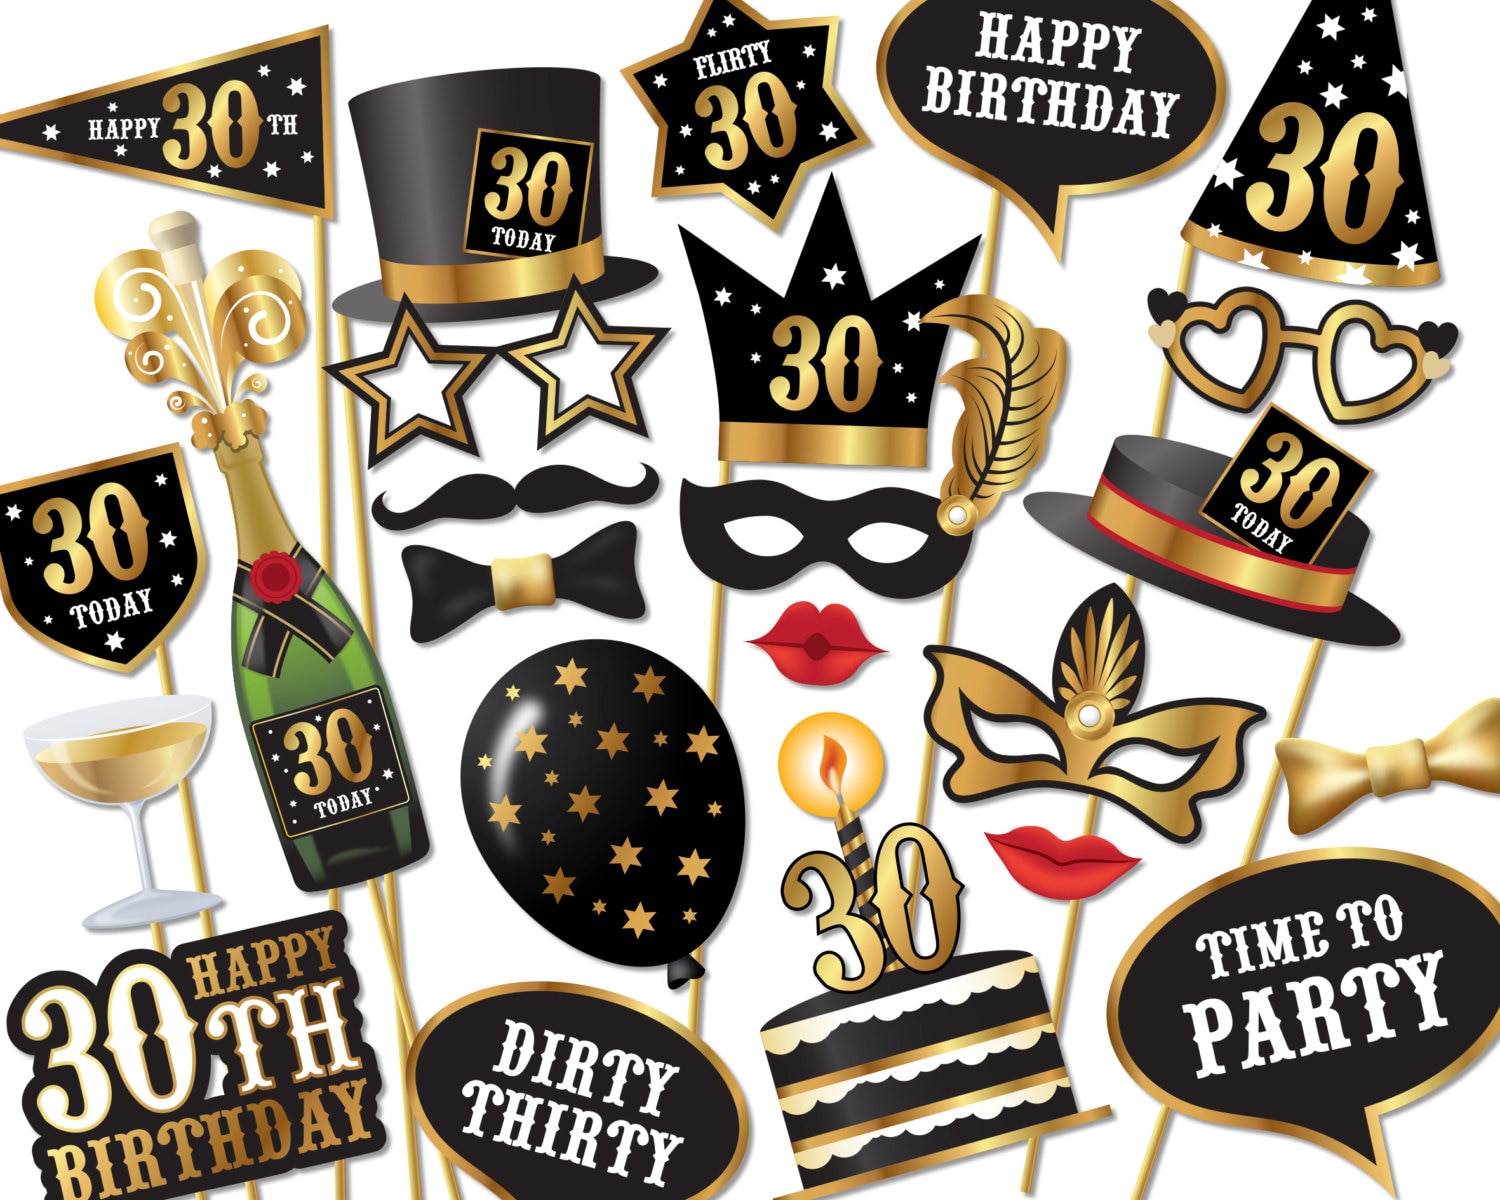 30th-birthday-photo-booth-props-instant-download-printable